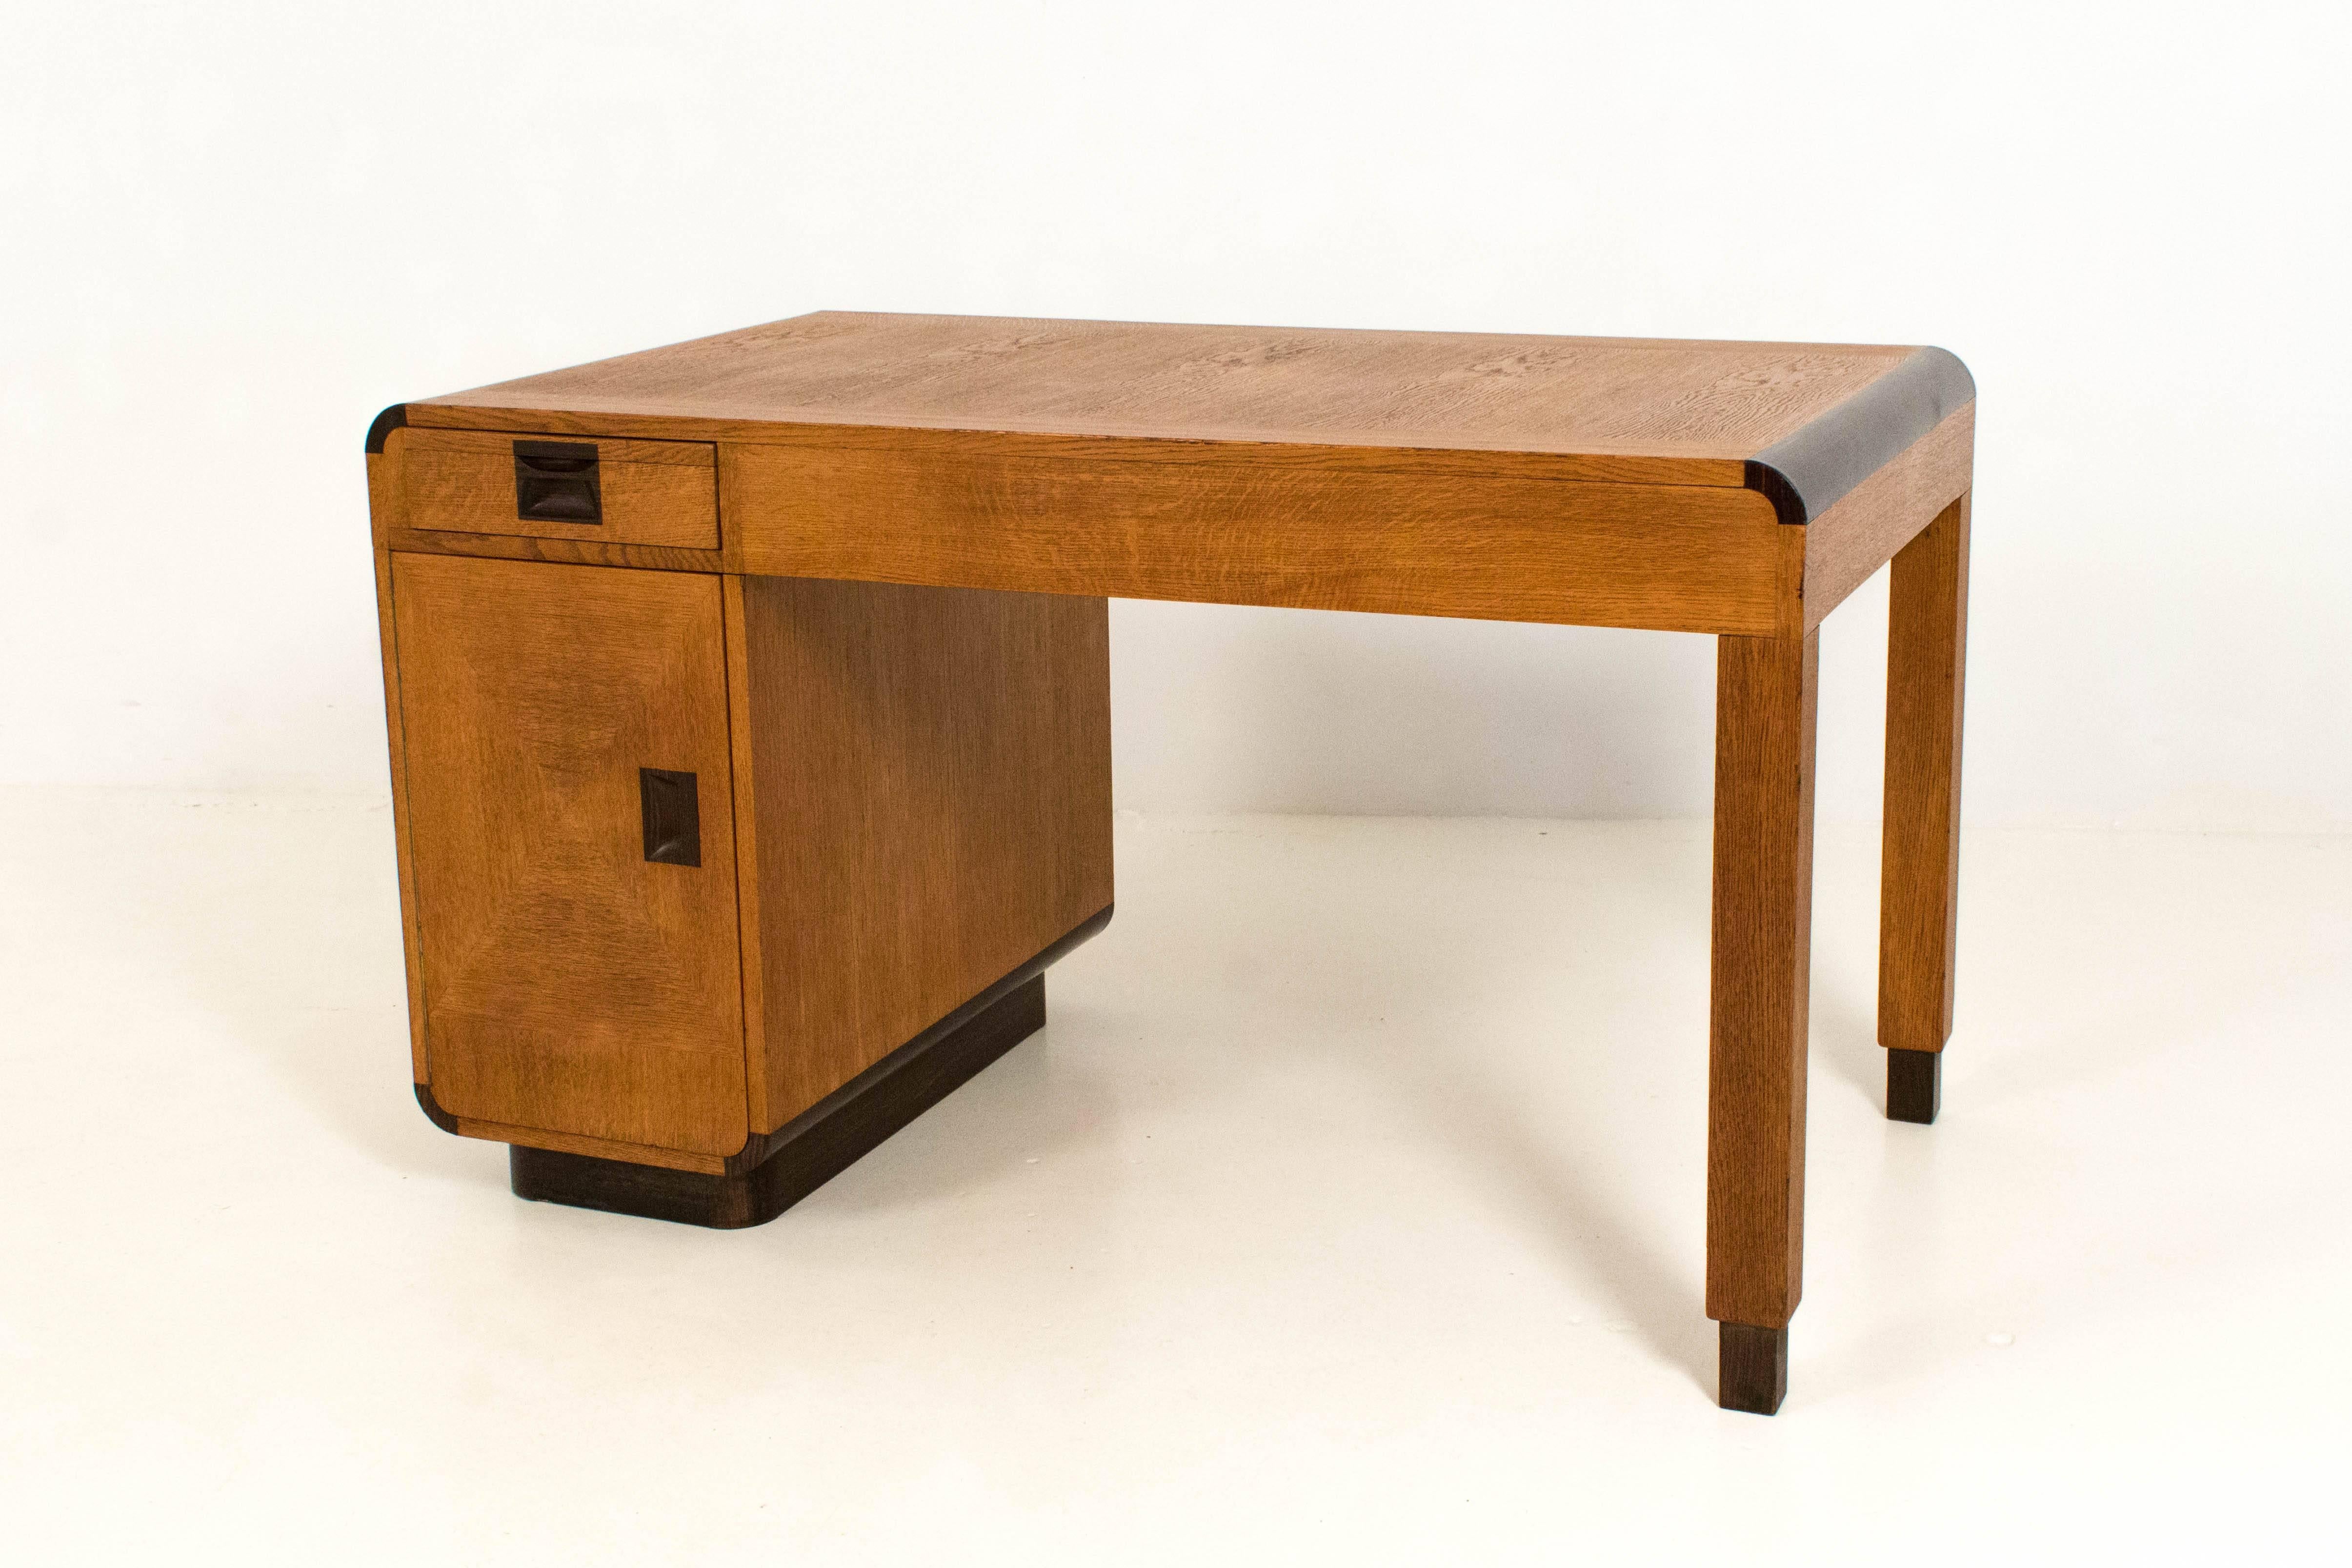 Early 20th Century Rare Art Deco Haagse School Partner Desk and Two Armchairs by Anton Lucas